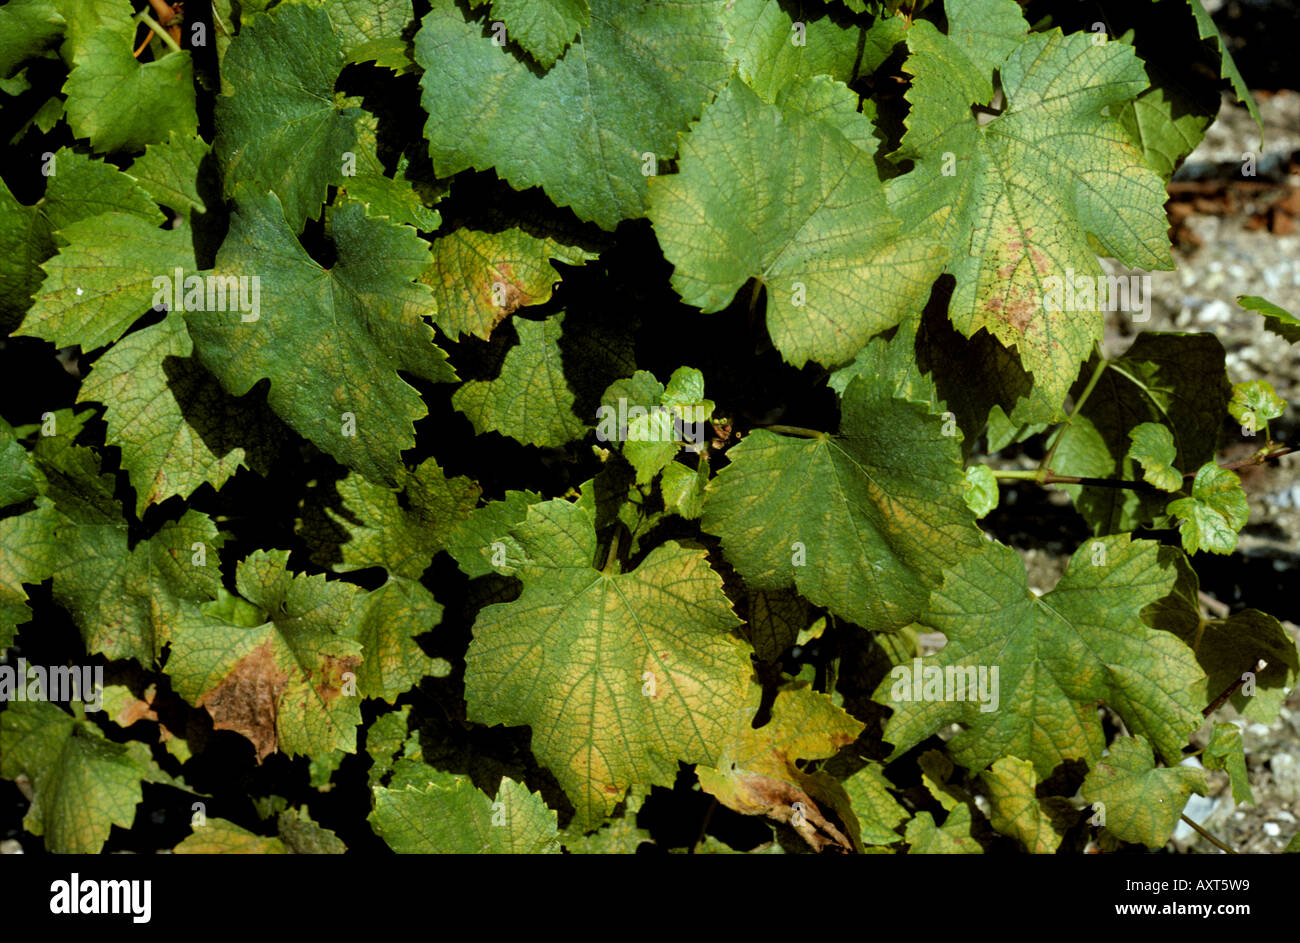 Two spotted spider mite Tetranychus urticae damage to grapevine leaves ...